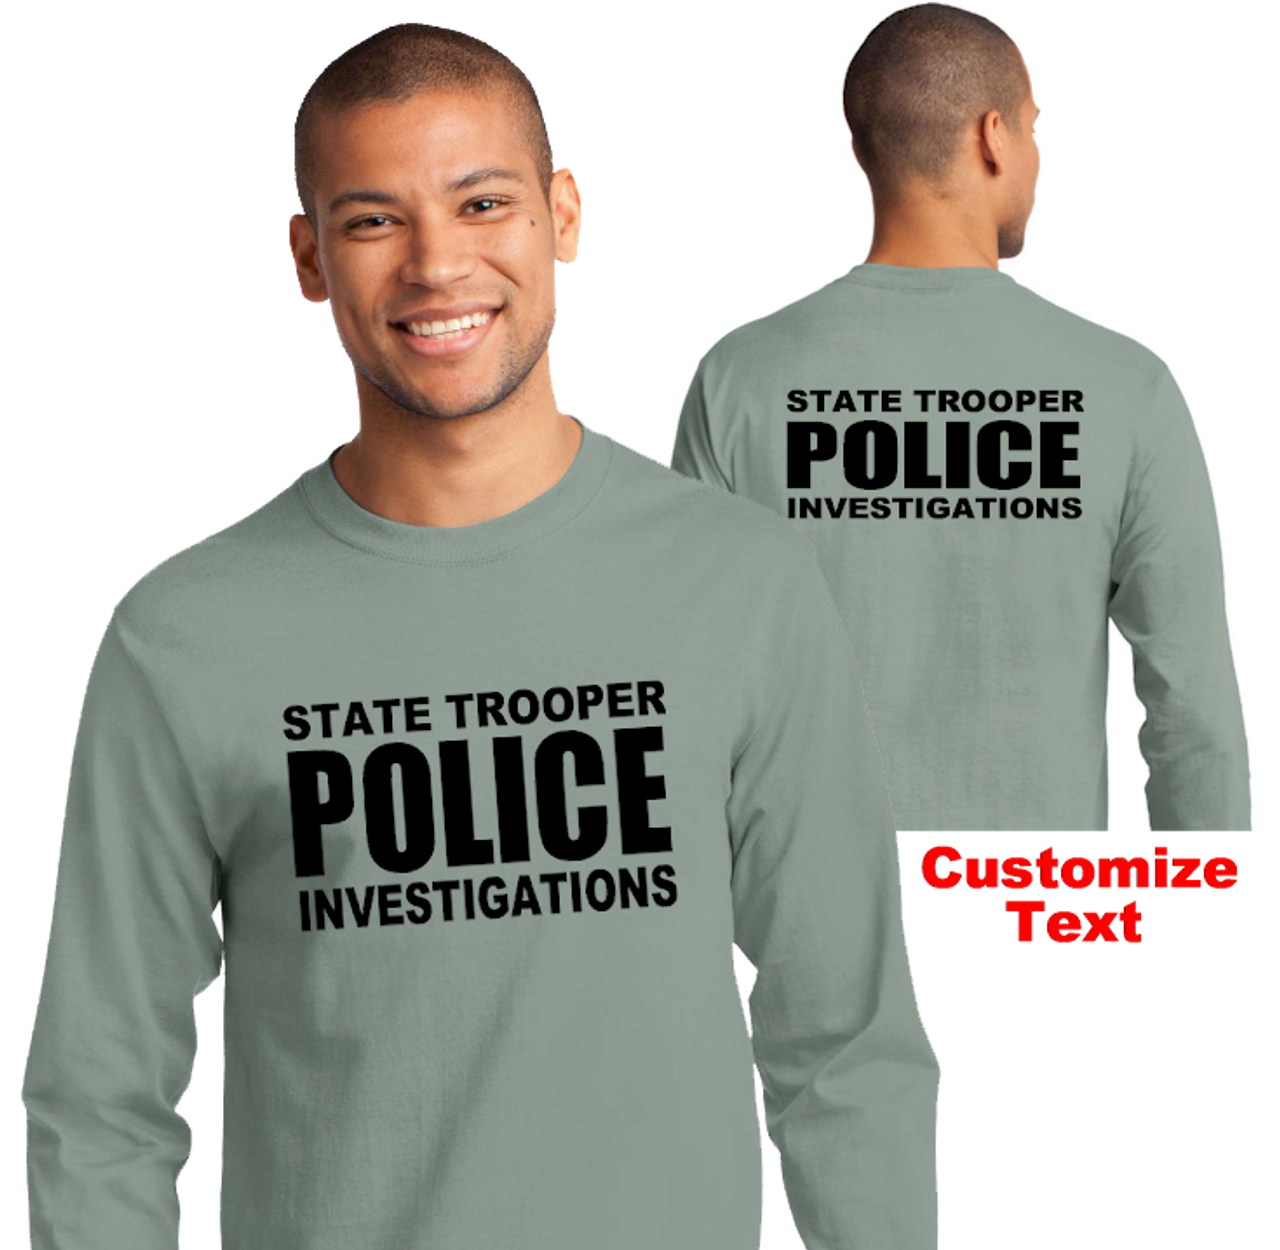 Blueline Tee's - Law Enforcement Tee's – Back the Blue Apparel - Tees Cops T-shirts – Police Tactical Tees – Police T-shirts – Embroidery – Custom screen printing